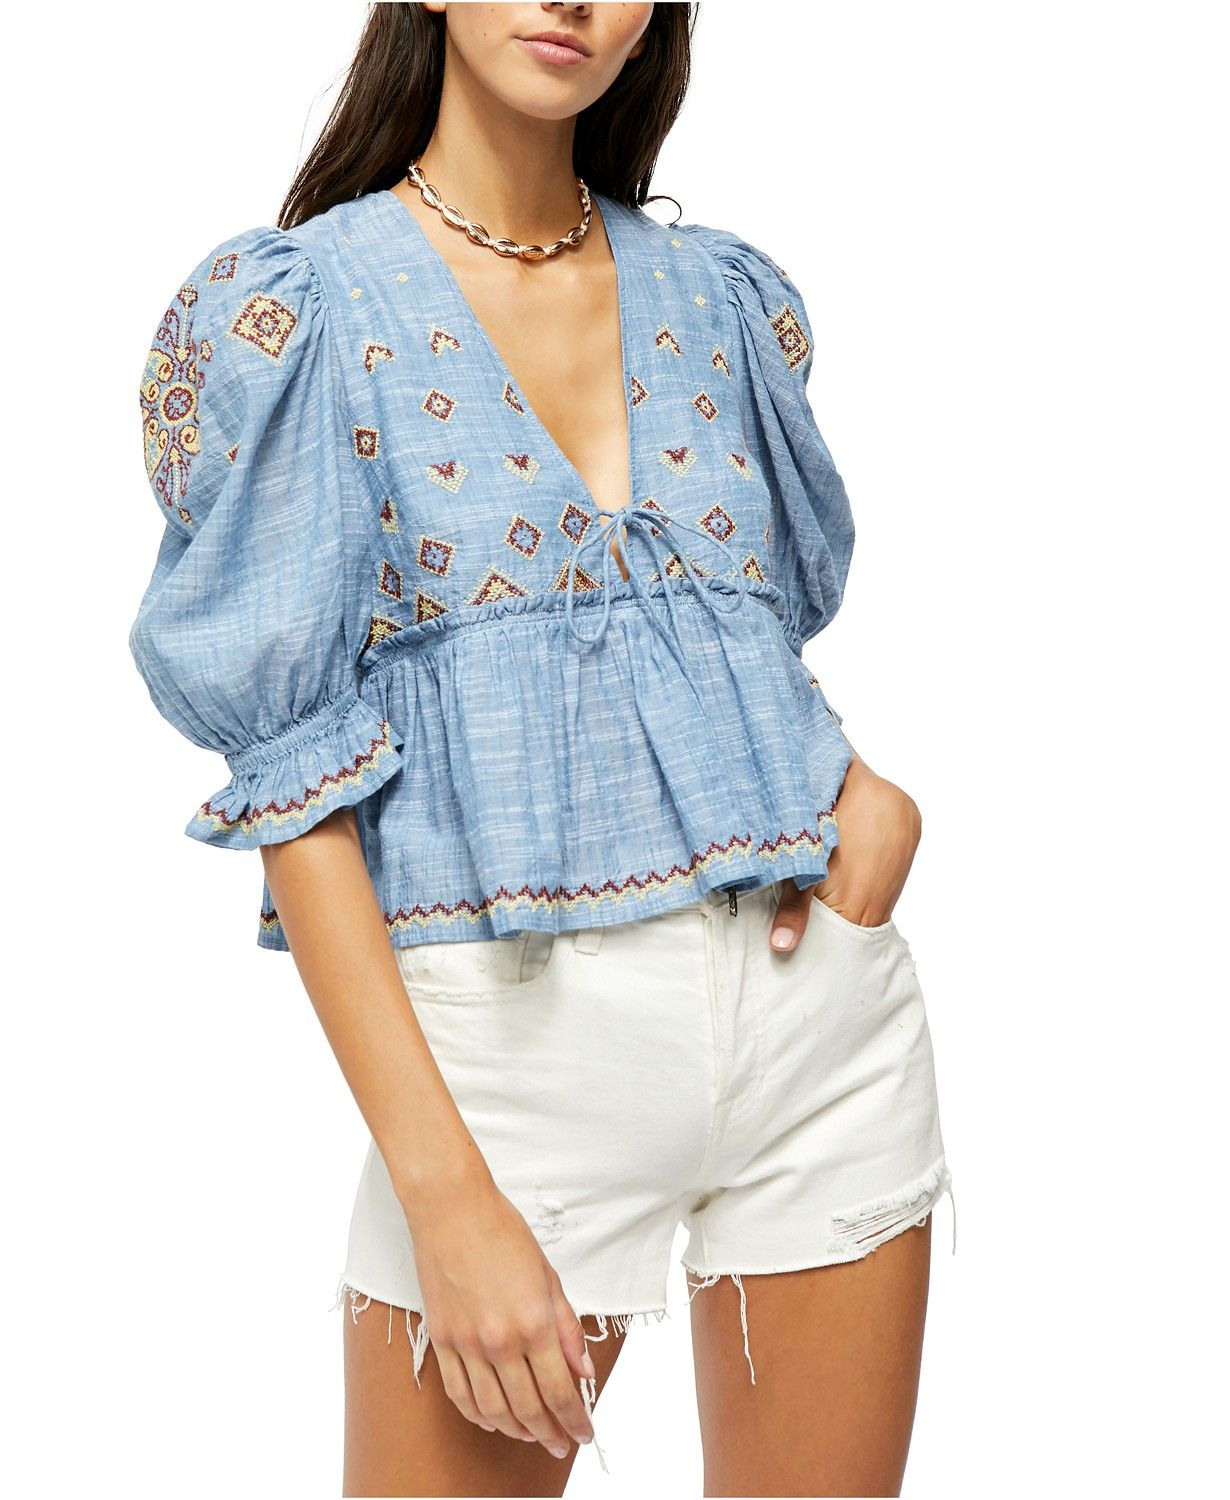 Free People Tallulah Embroidered Top & Reviews - Tops - Women - Macy's | Macys (US)